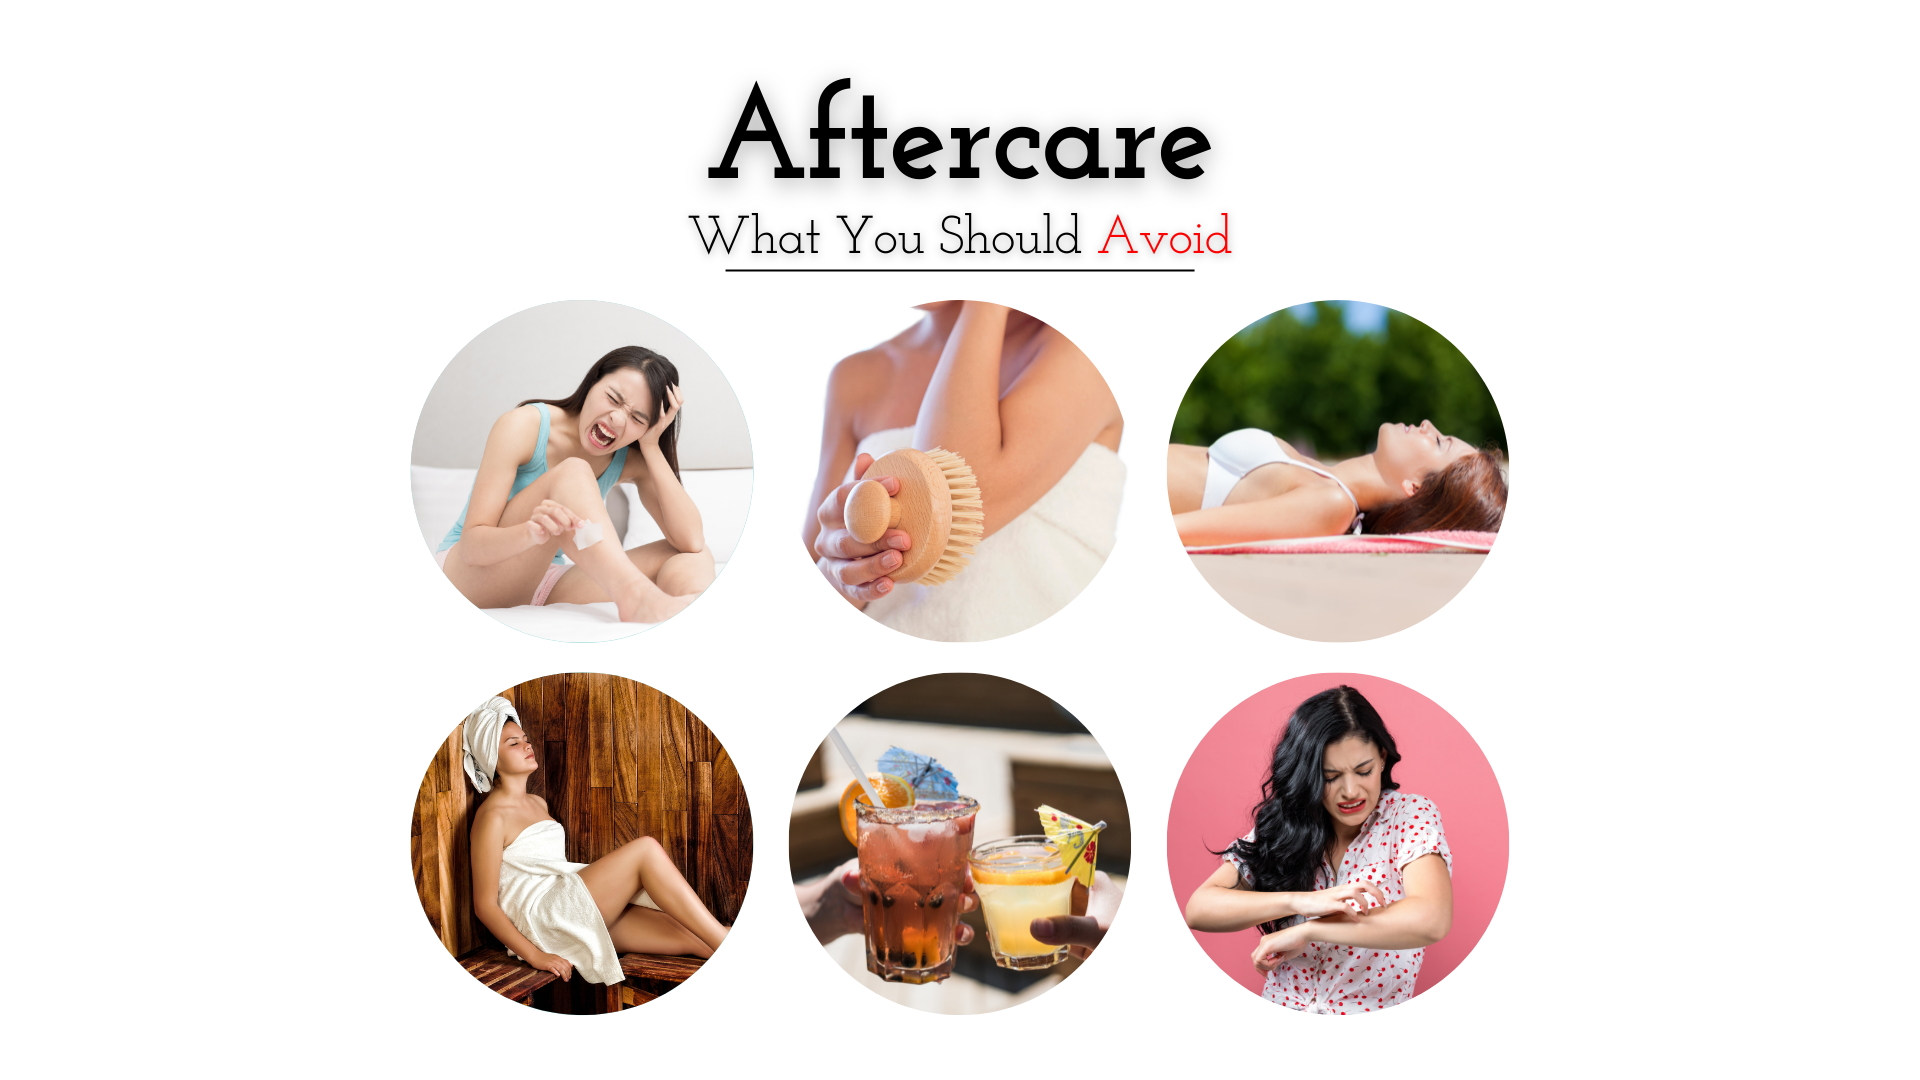 Aftercare: What You Should Avoid